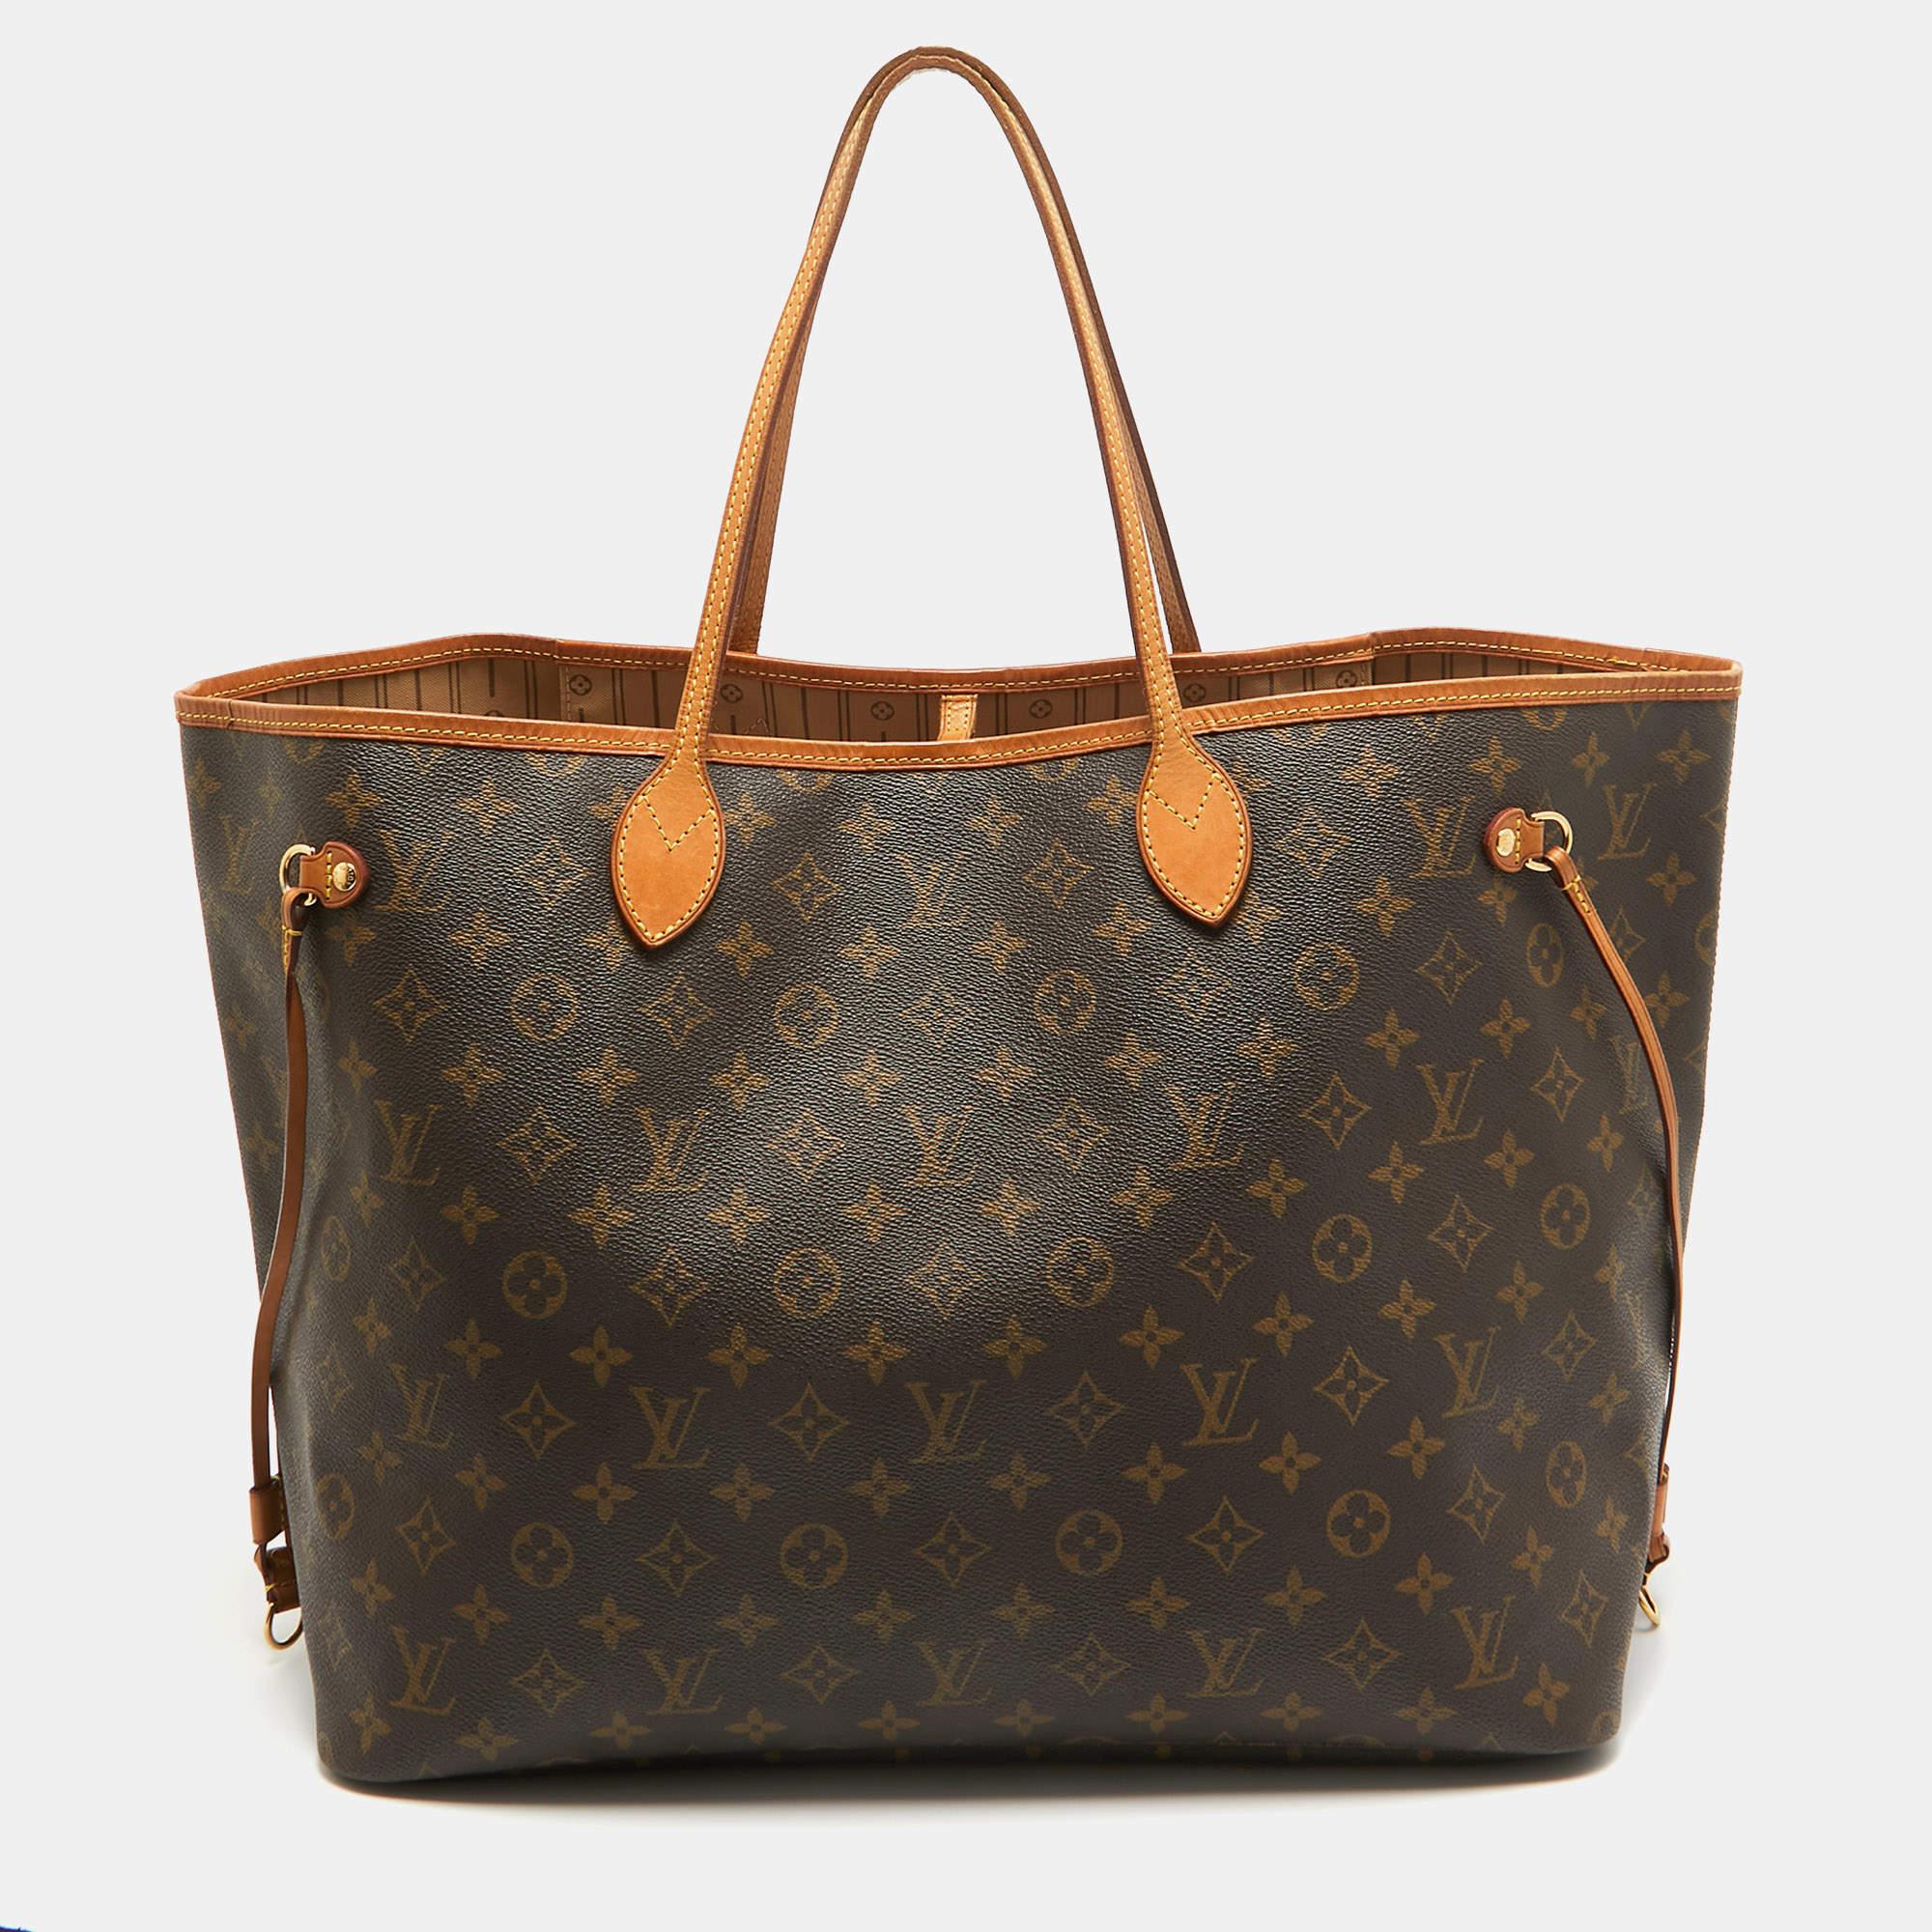 Introduced in 2007, the Neverfull by Louis Vuitton is an all-time classic. This GM-size Neverfull comes crafted from Monogram canvas and has two leather handles.

